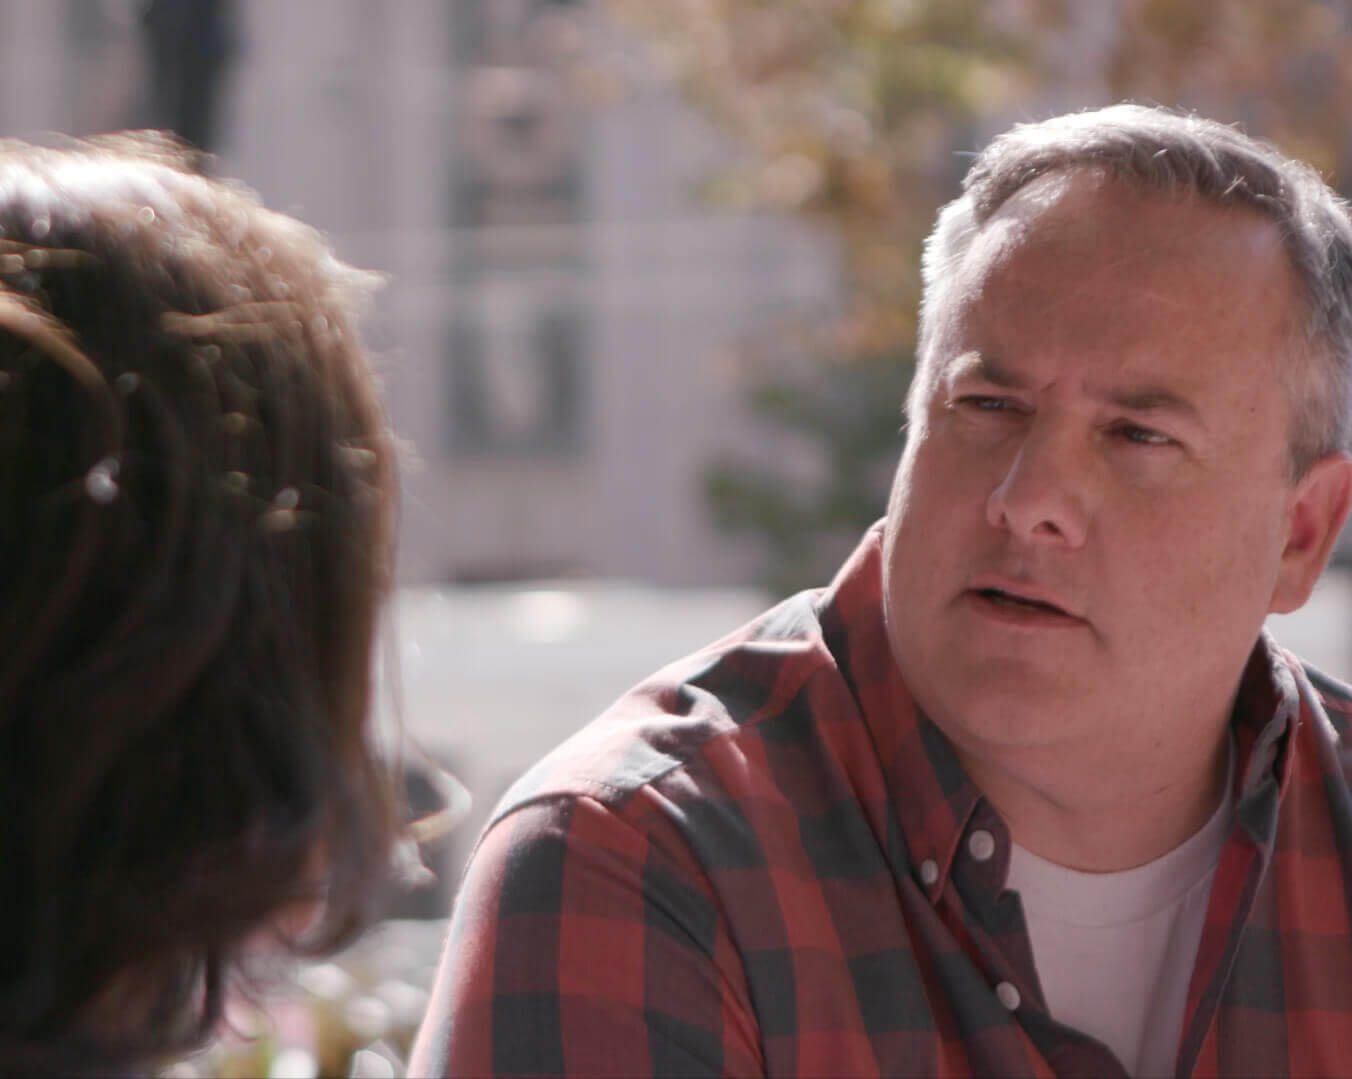 Man In a Red And Black Plaid Shirt Talking To a Woman Outside